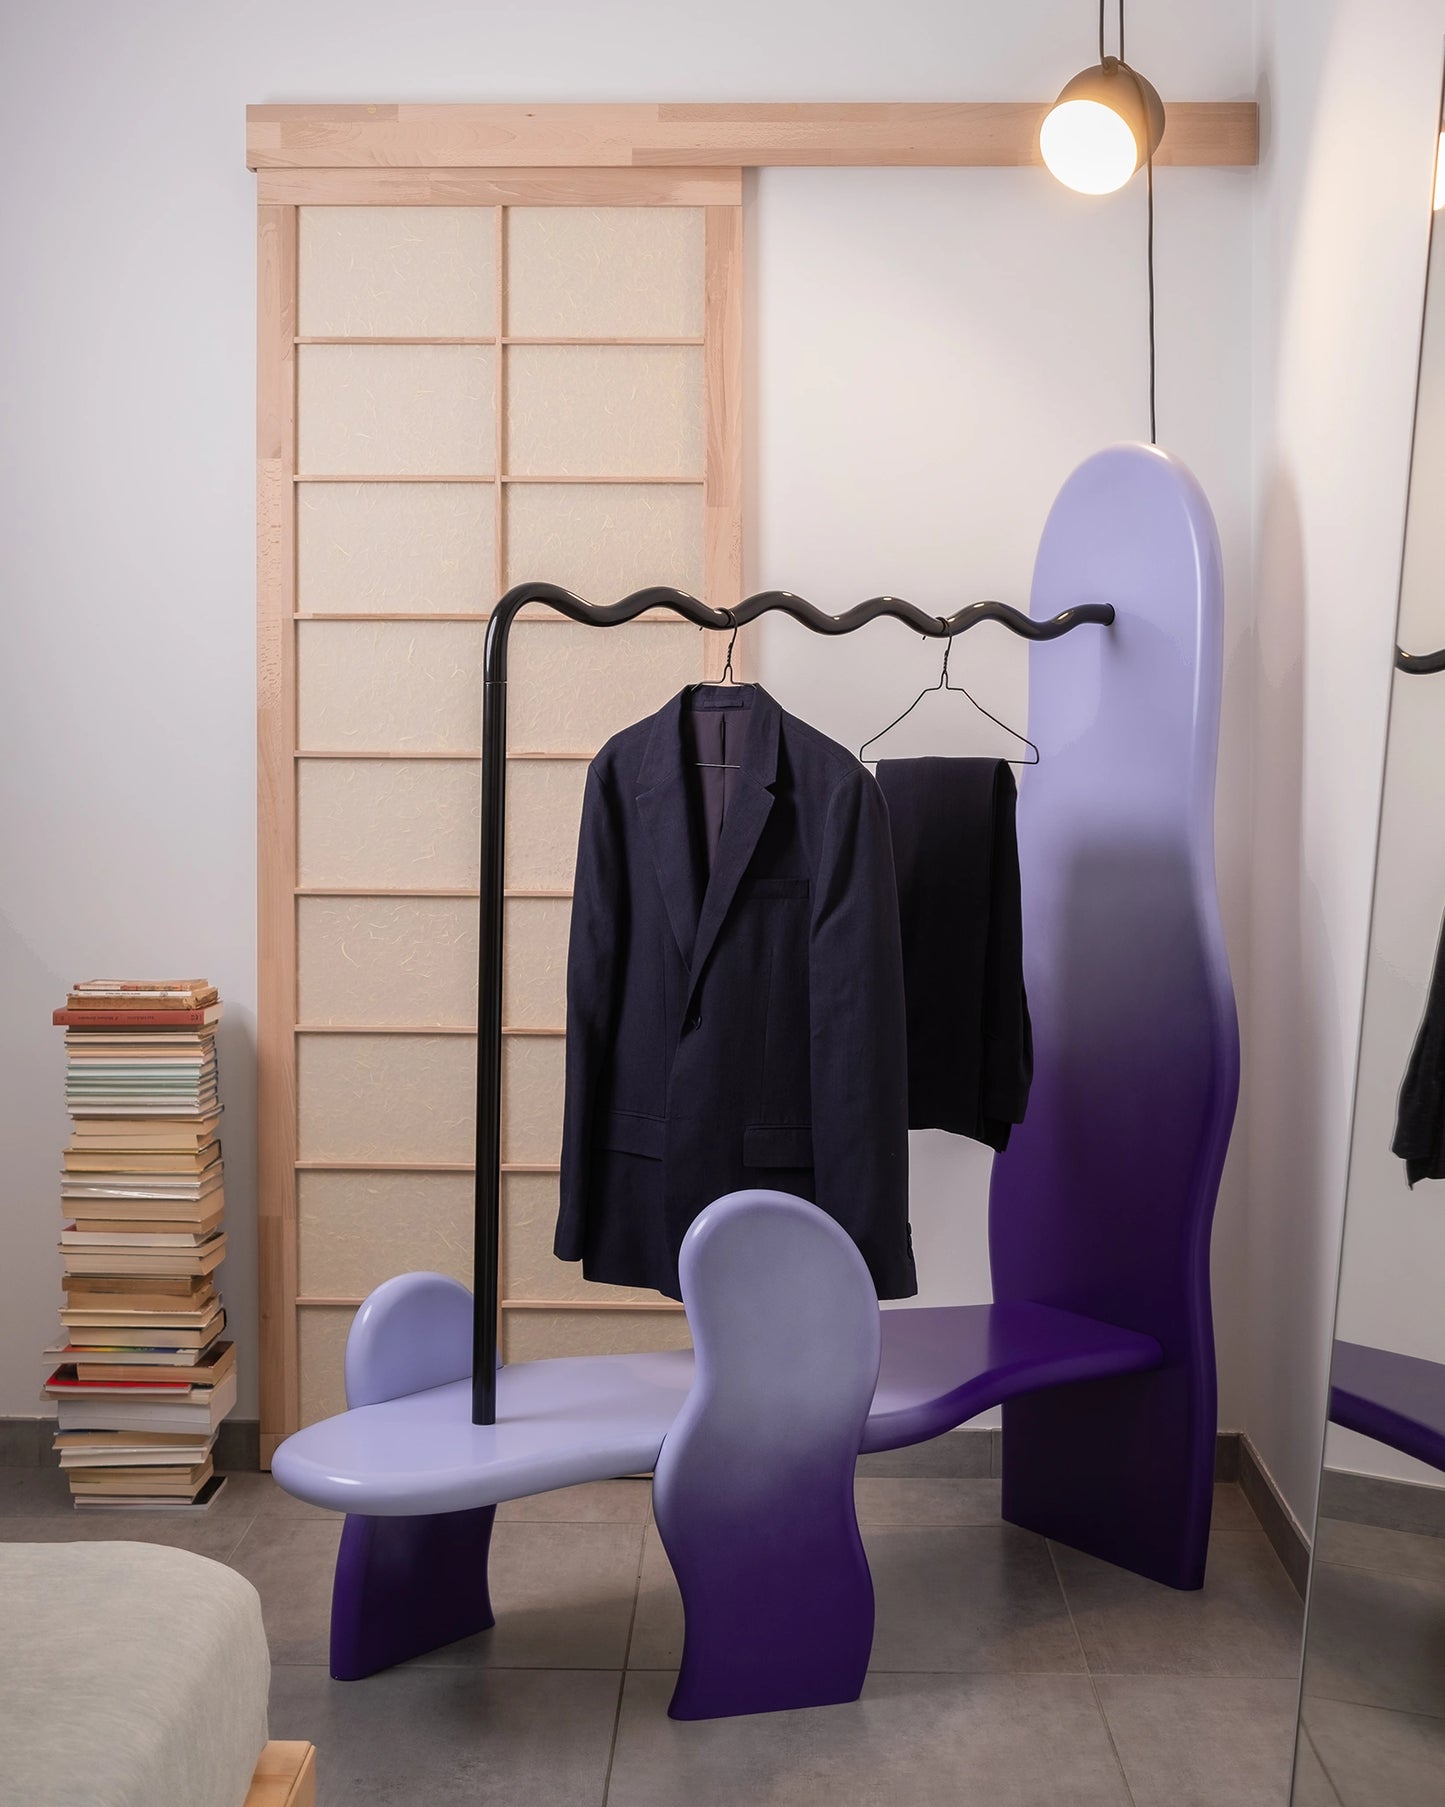 clothing rack in a home setting with soft shapes and a wavy metal hanging tube, purple gradient, clothes on it